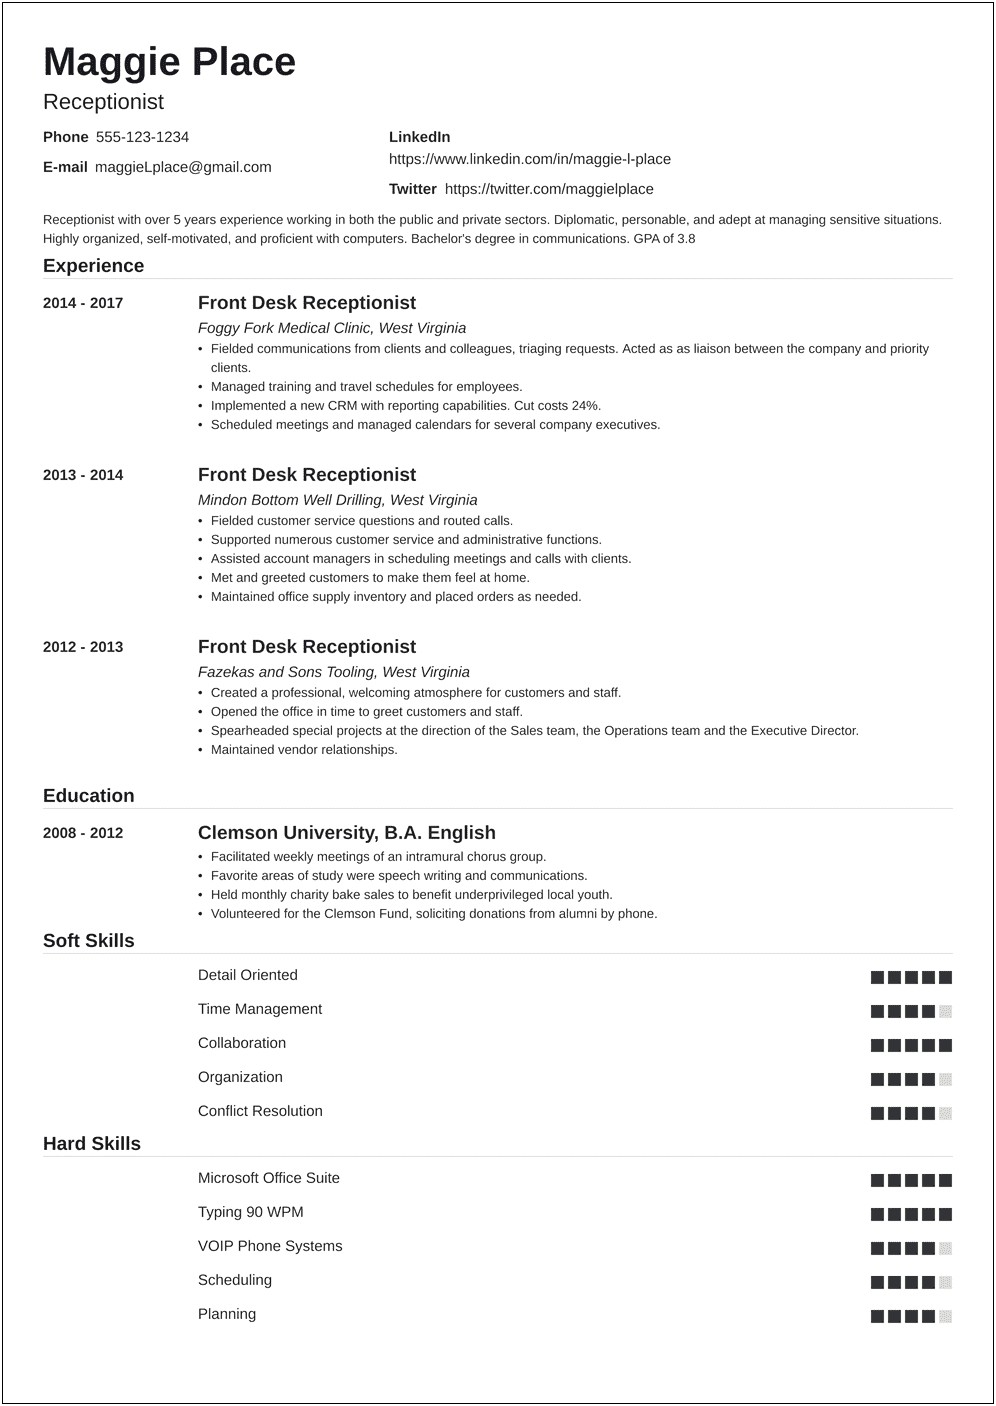 Customize Free Resume For Front Desk Agent